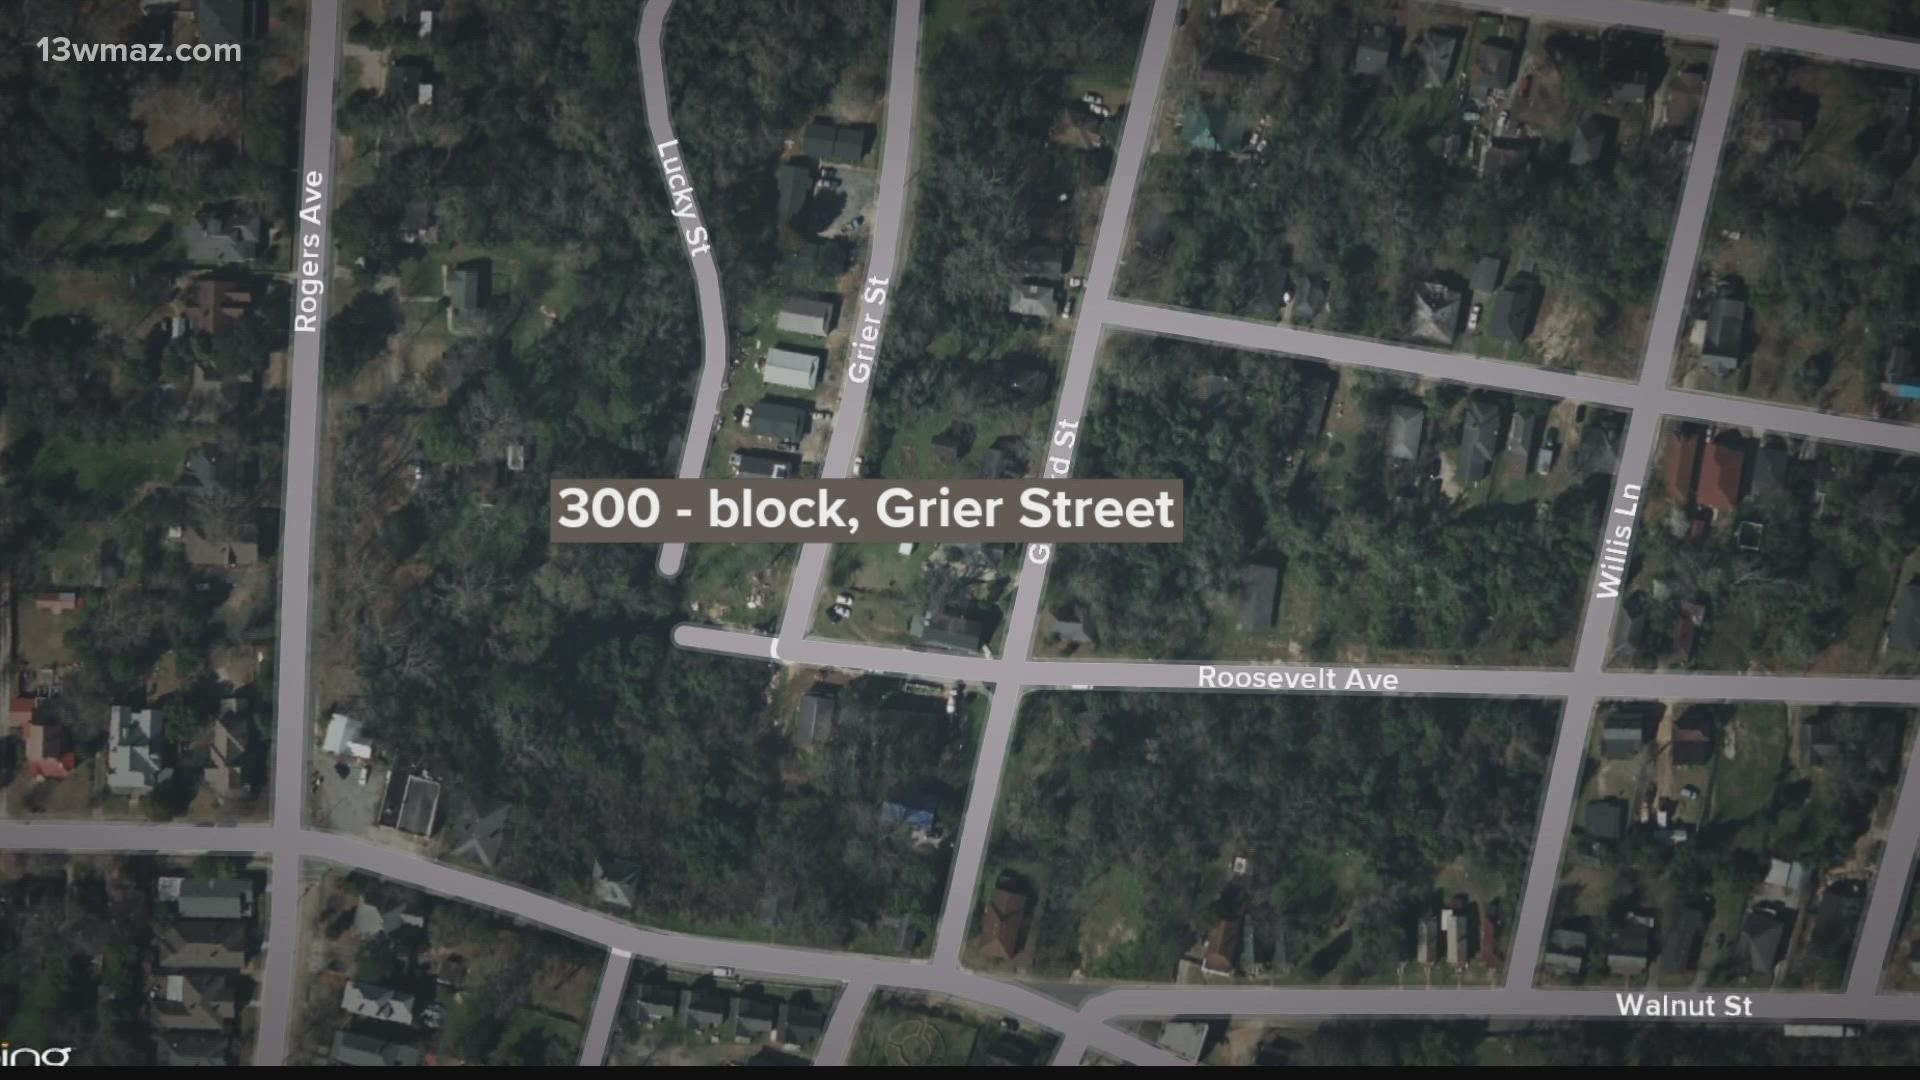 A man was shot multiple times on Grier Street.